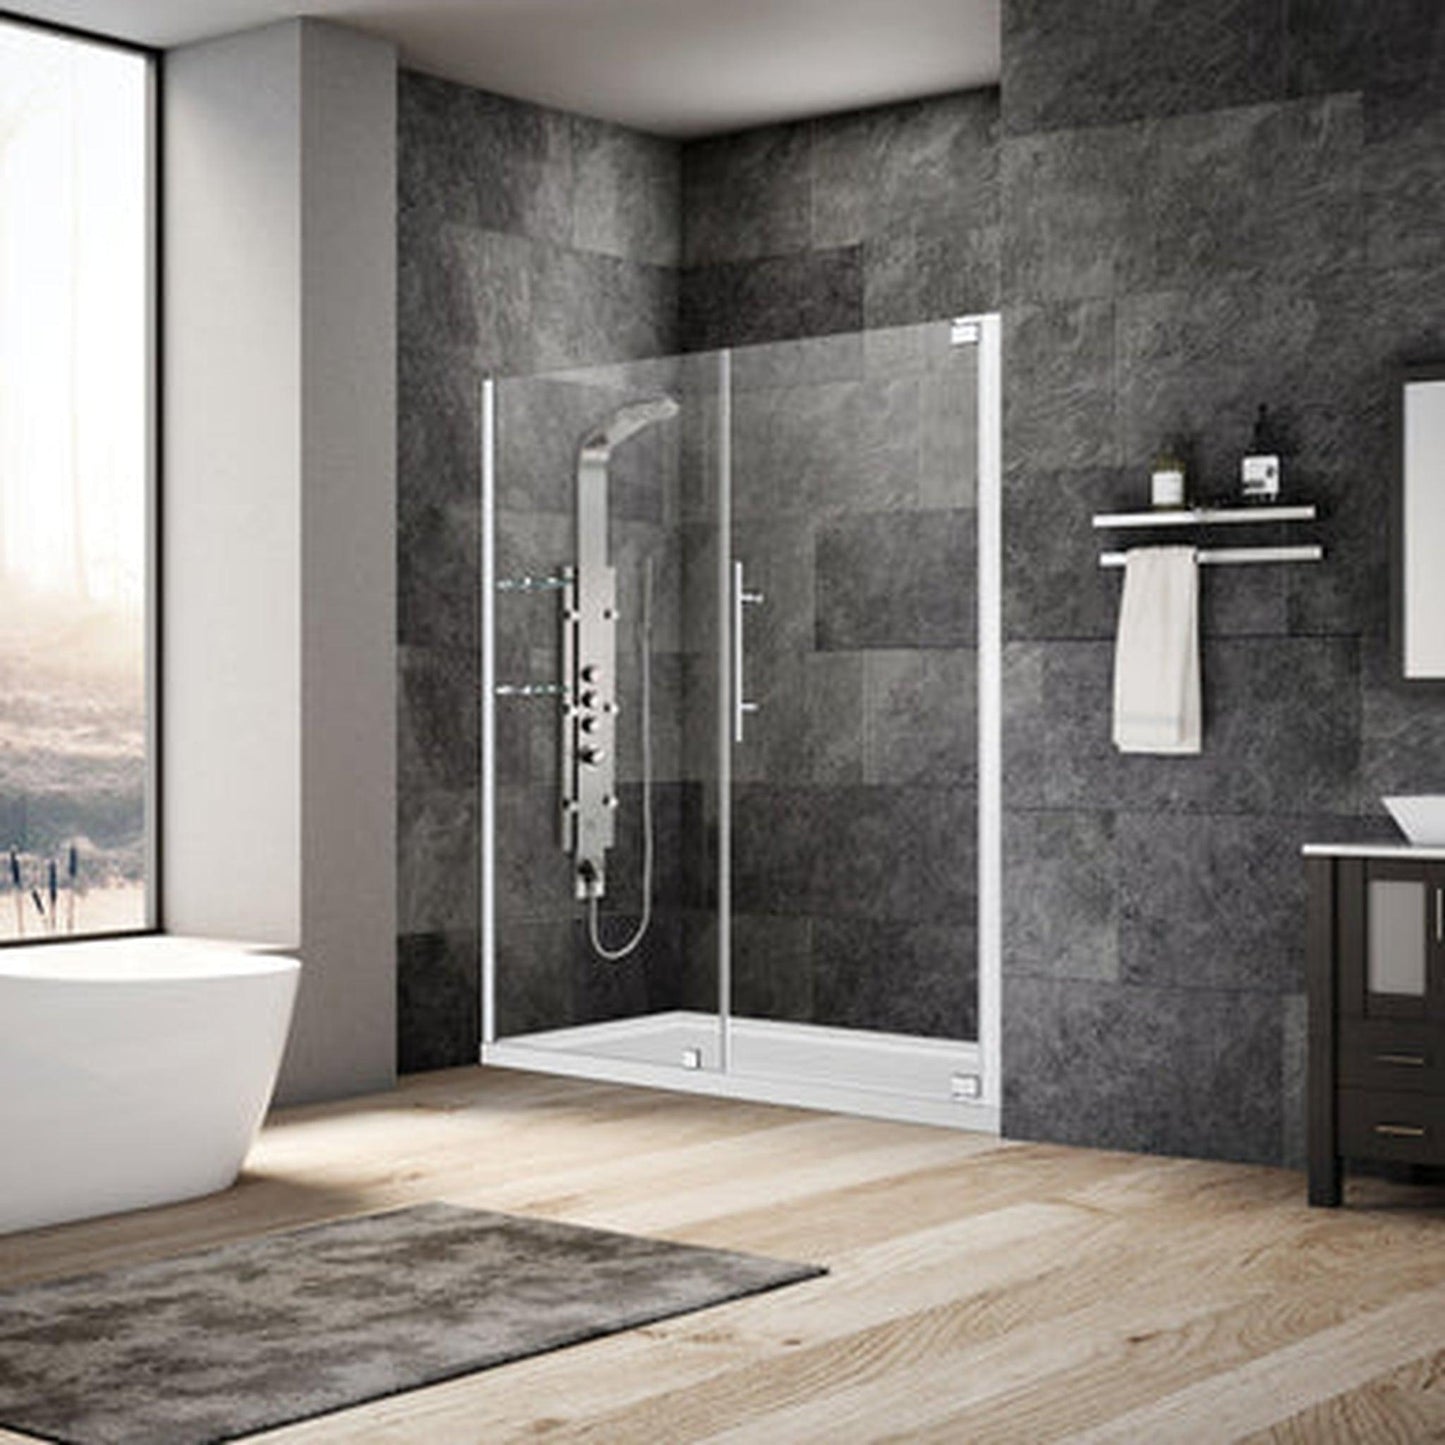 LessCare Ultra-G 68-70" x 72" Chrome Swing-Out Shower Door